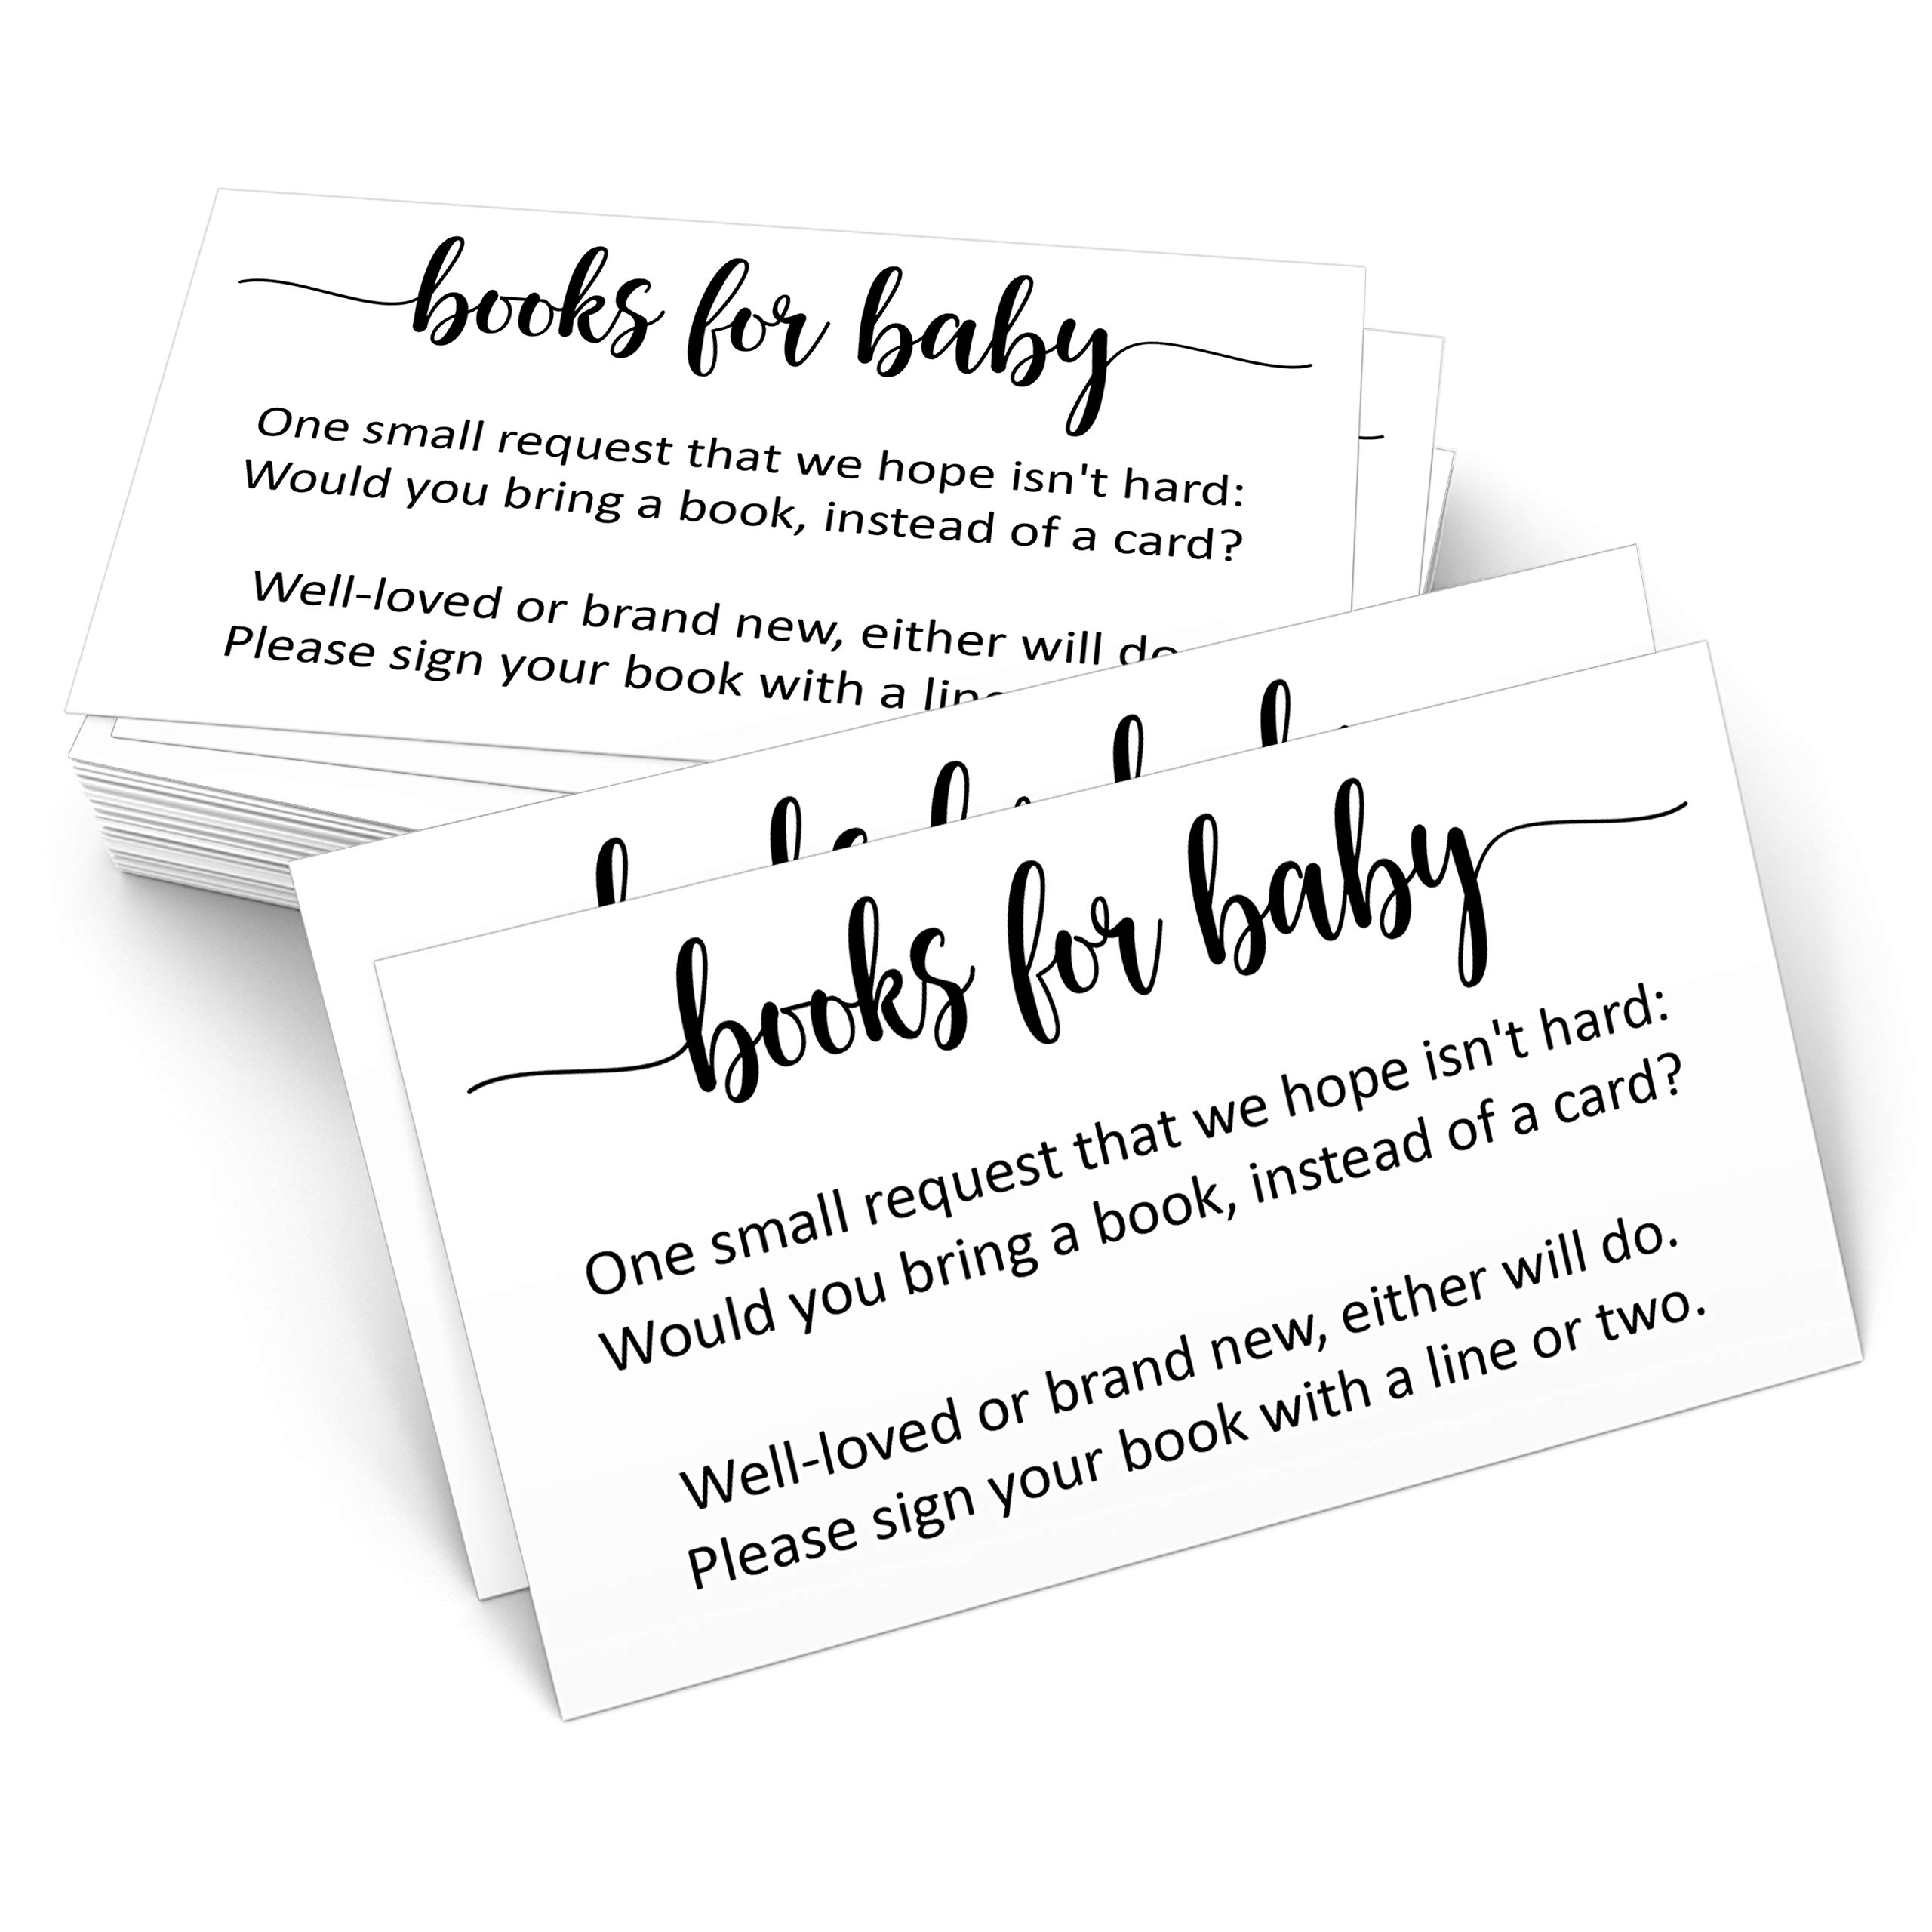 321Done Books for Baby Cards (Set of 50) 3.5 x 2 Baby Shower Insert for Invitations, Business Card Size, Book Instead of Card Request Gift, Small White - Made in USA